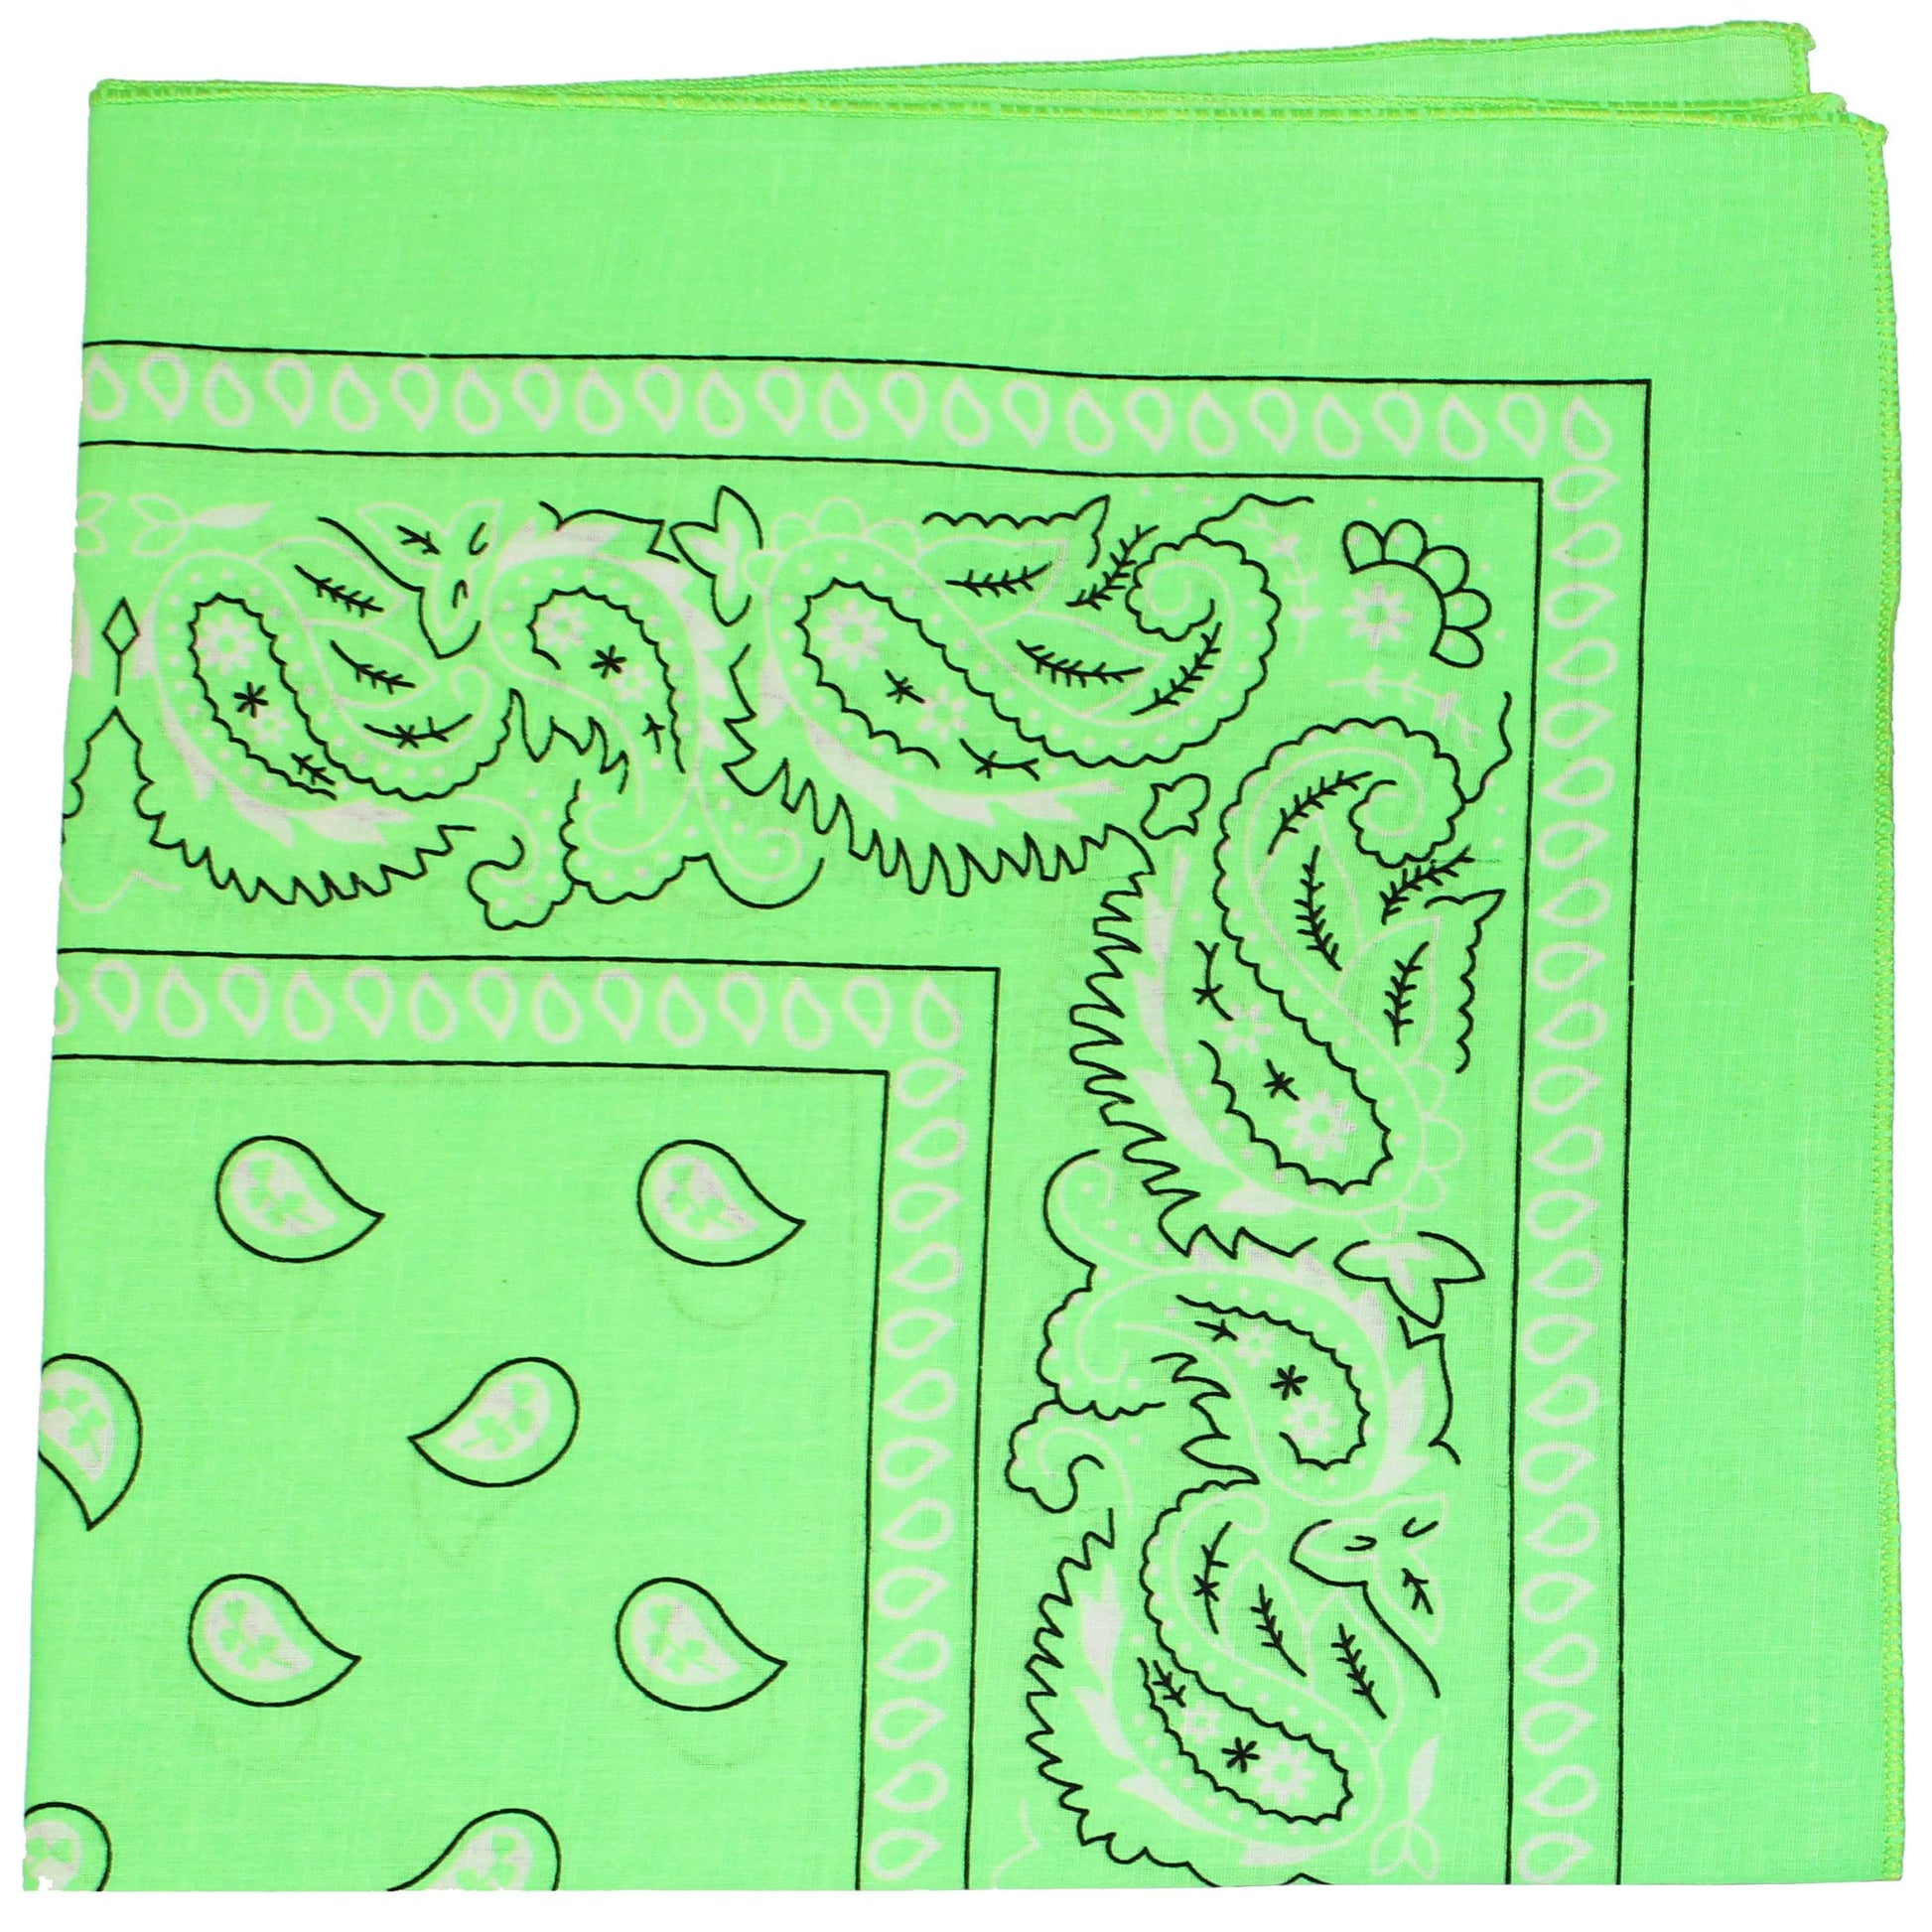 Qraftsy Neon Colors Paisley Bandana - Cotton - Available in 1 Pack or 3 Pack